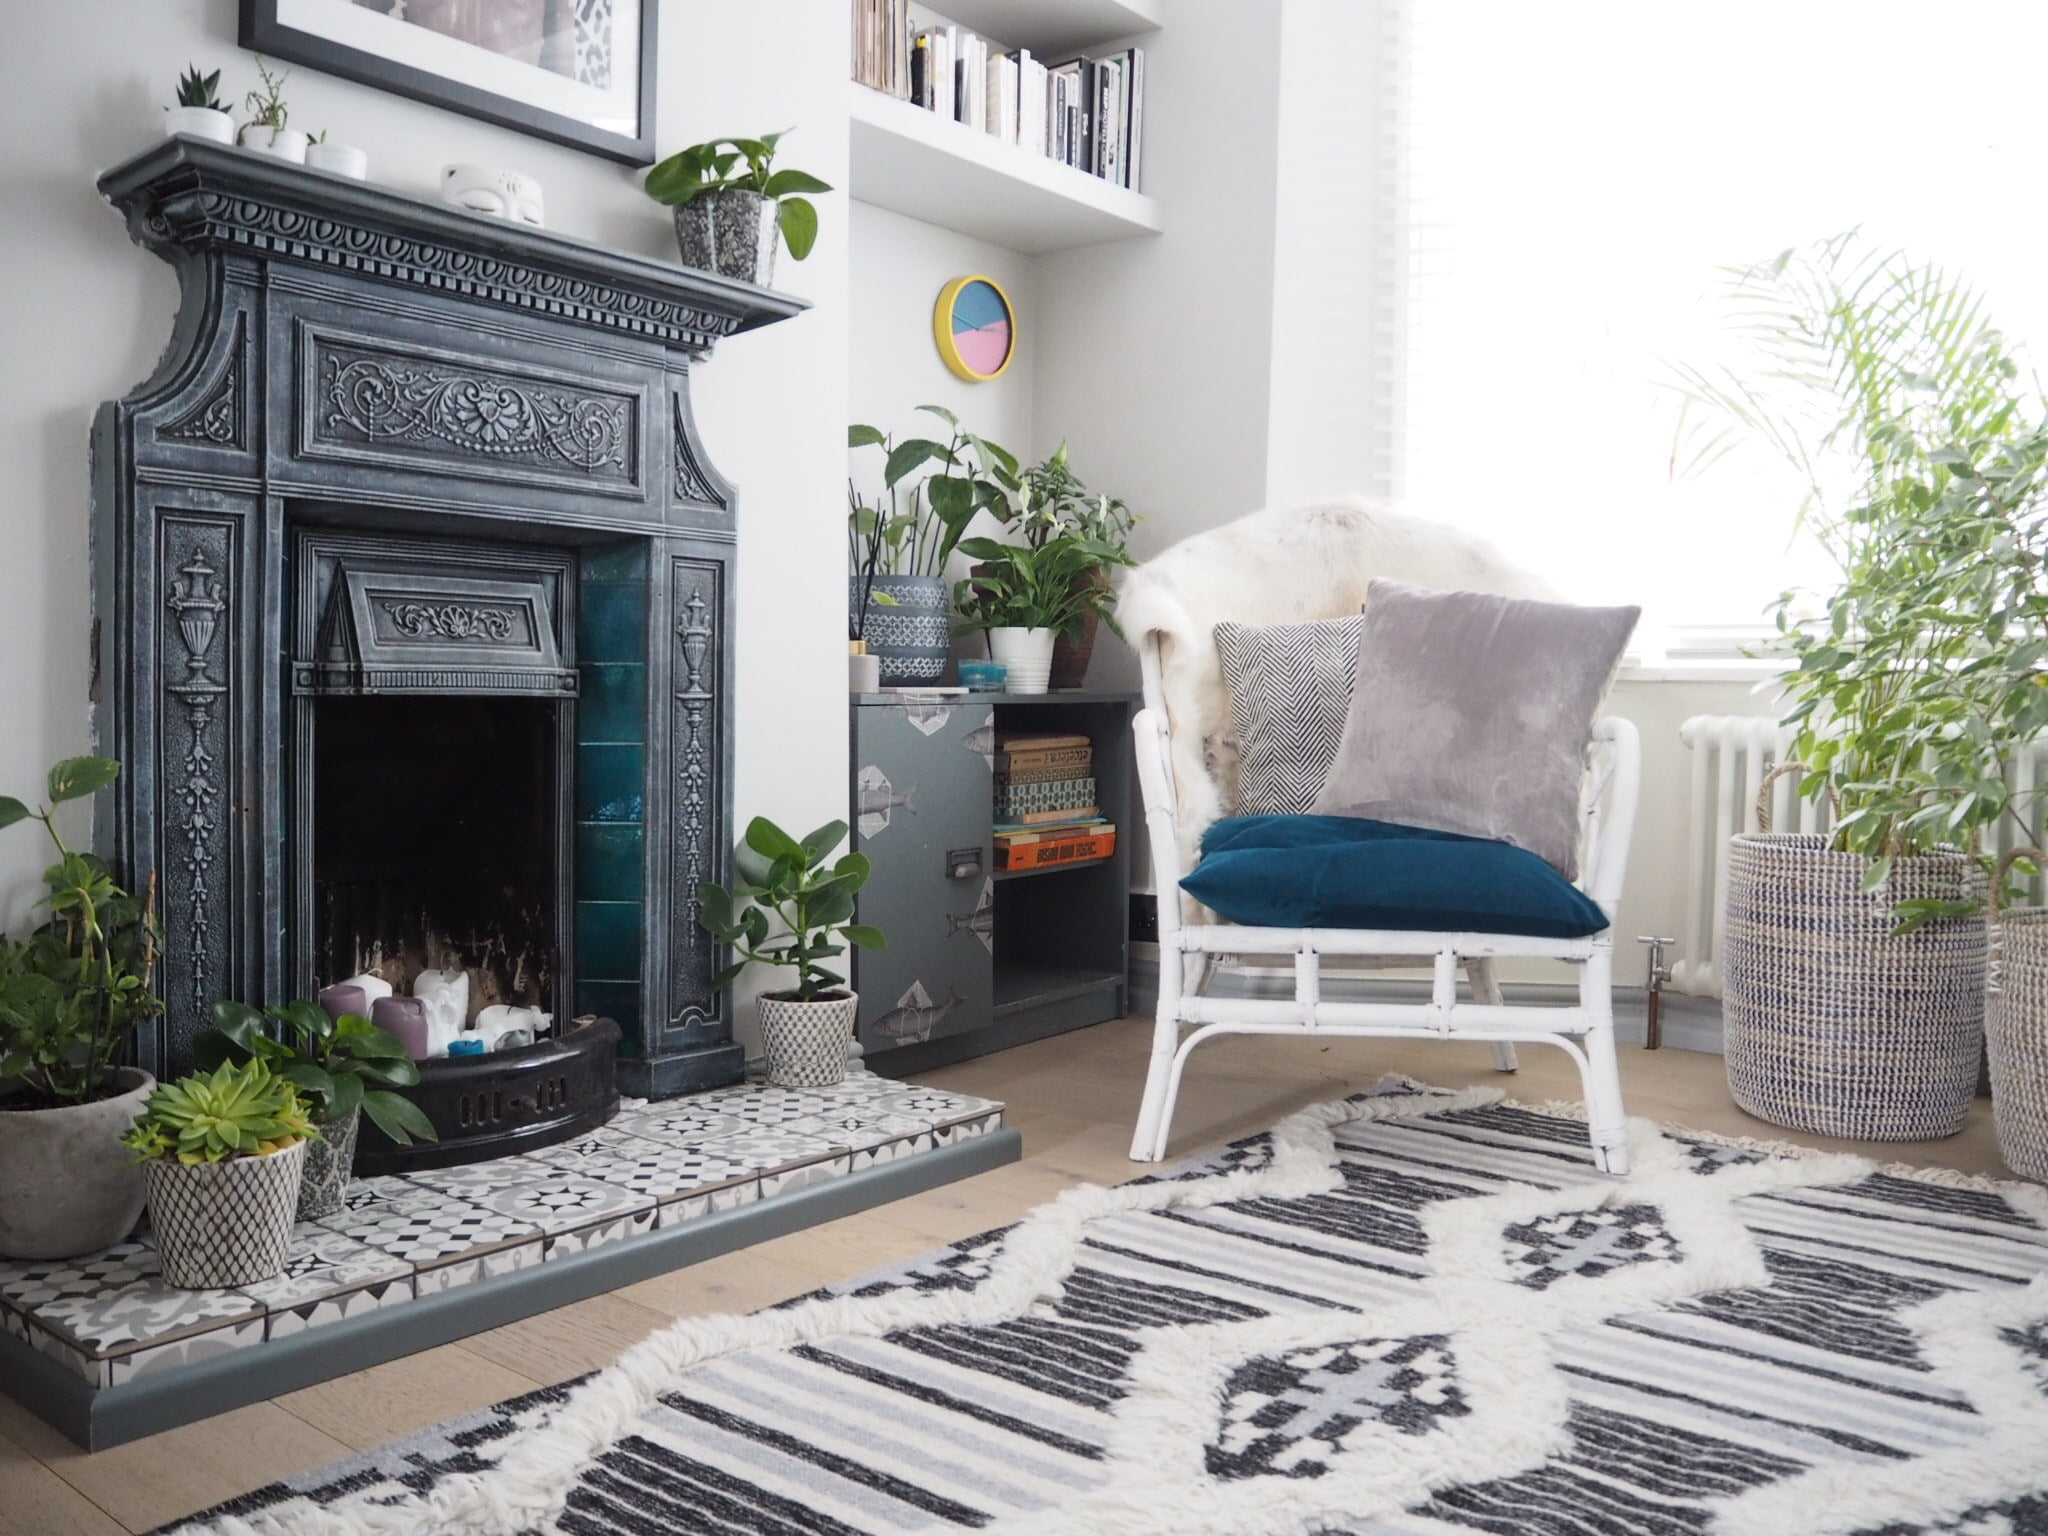 A budget Living Room makeover with lots of before and after shots - with a boho vibes by Maxine Brady from WeLoveHomeBlog